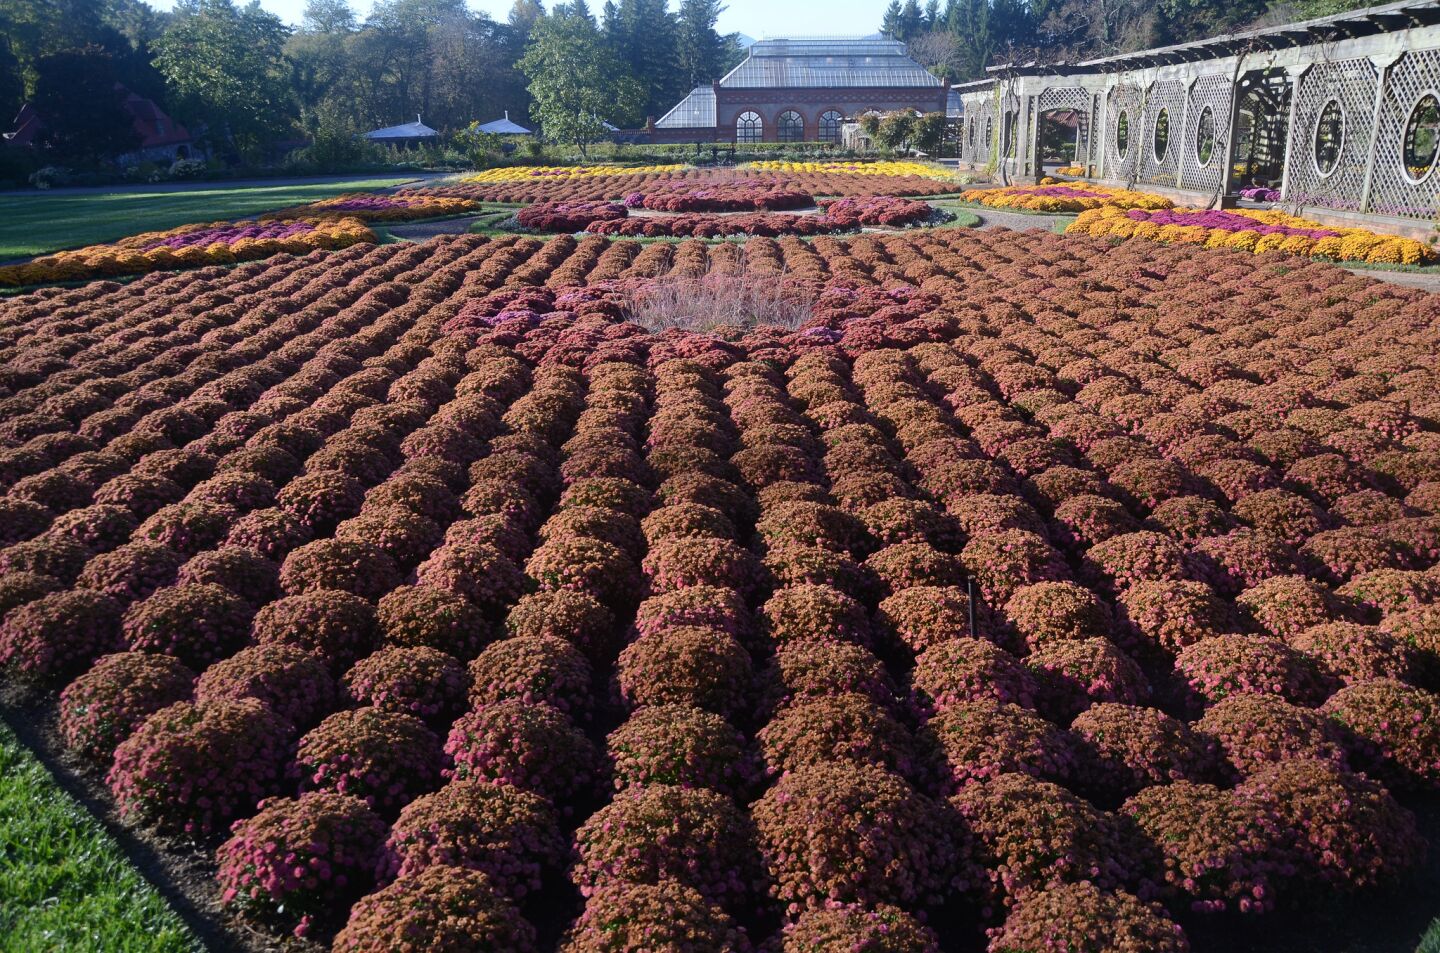 The Biltmore Estate, in Asheville, N.C., includes acres of seasonal gardens, along with a massive conservatory (in the background here) that keeps hothouse flowers going after autumn temperatures drop. Photo taken Oct. 23.